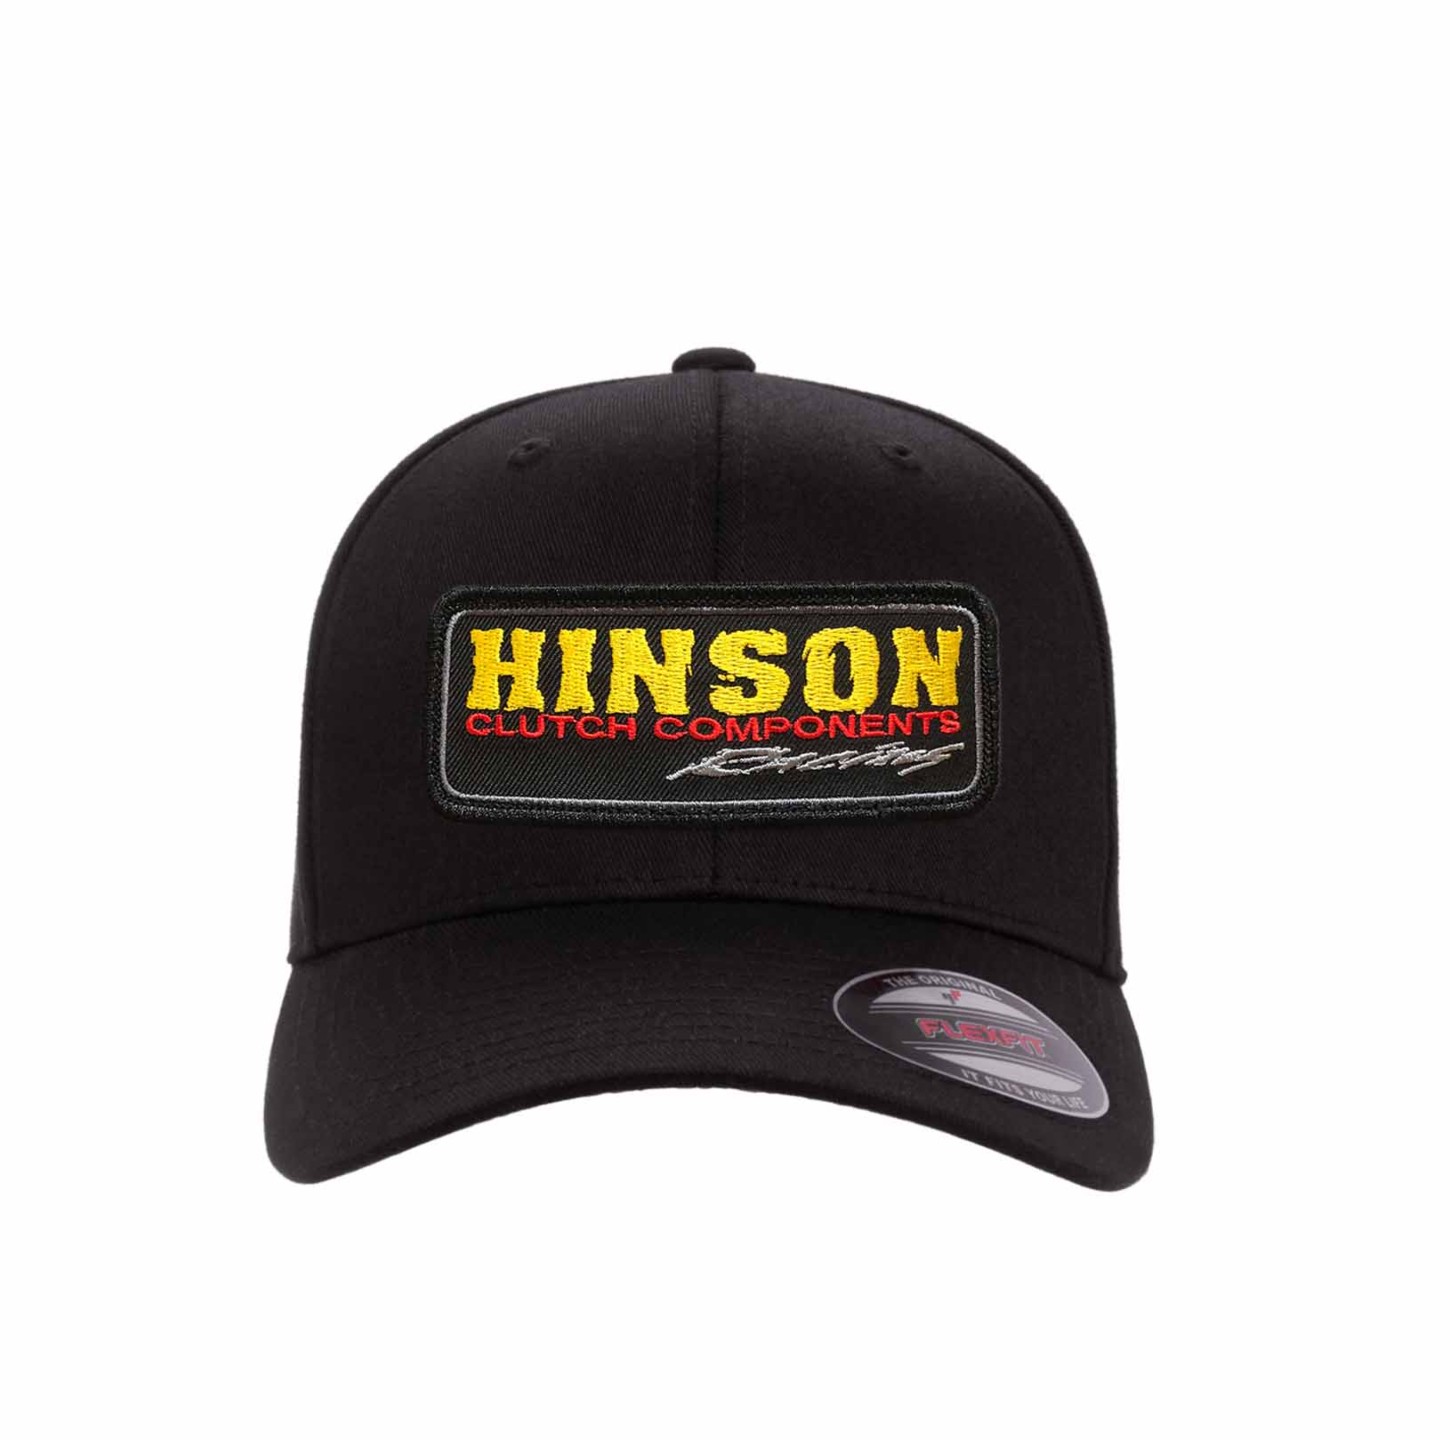 Hinson Hat - Flexfit Wooly Combed Blk - Hinson Clutch Components